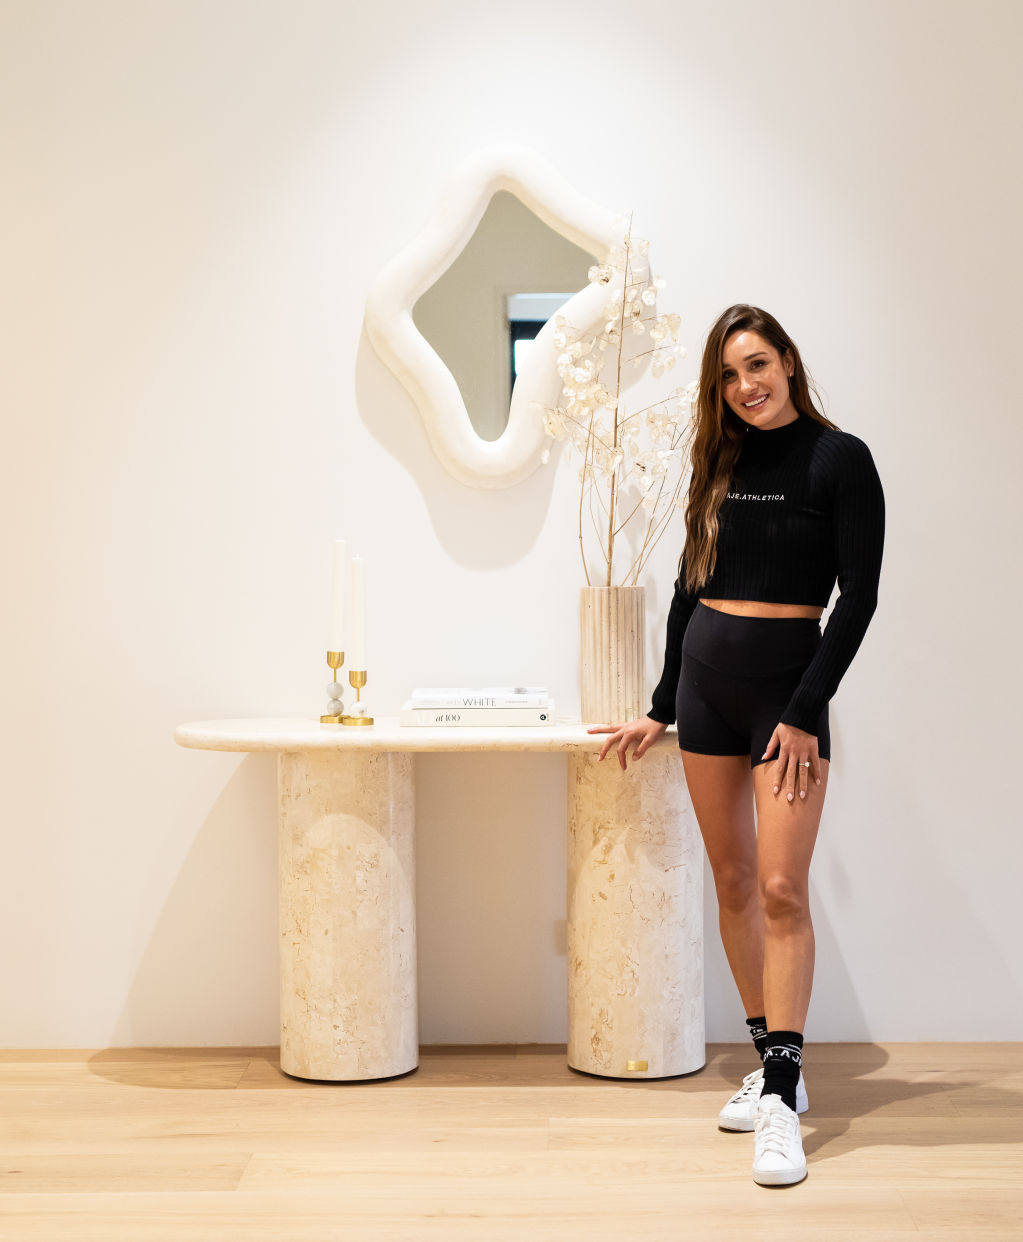 Her work may have taken her all over the world, but the face and co-founder of fitness app Sweat still happily calls her childhood suburb in Adelaide home. Photo: JOSIE WITHERS